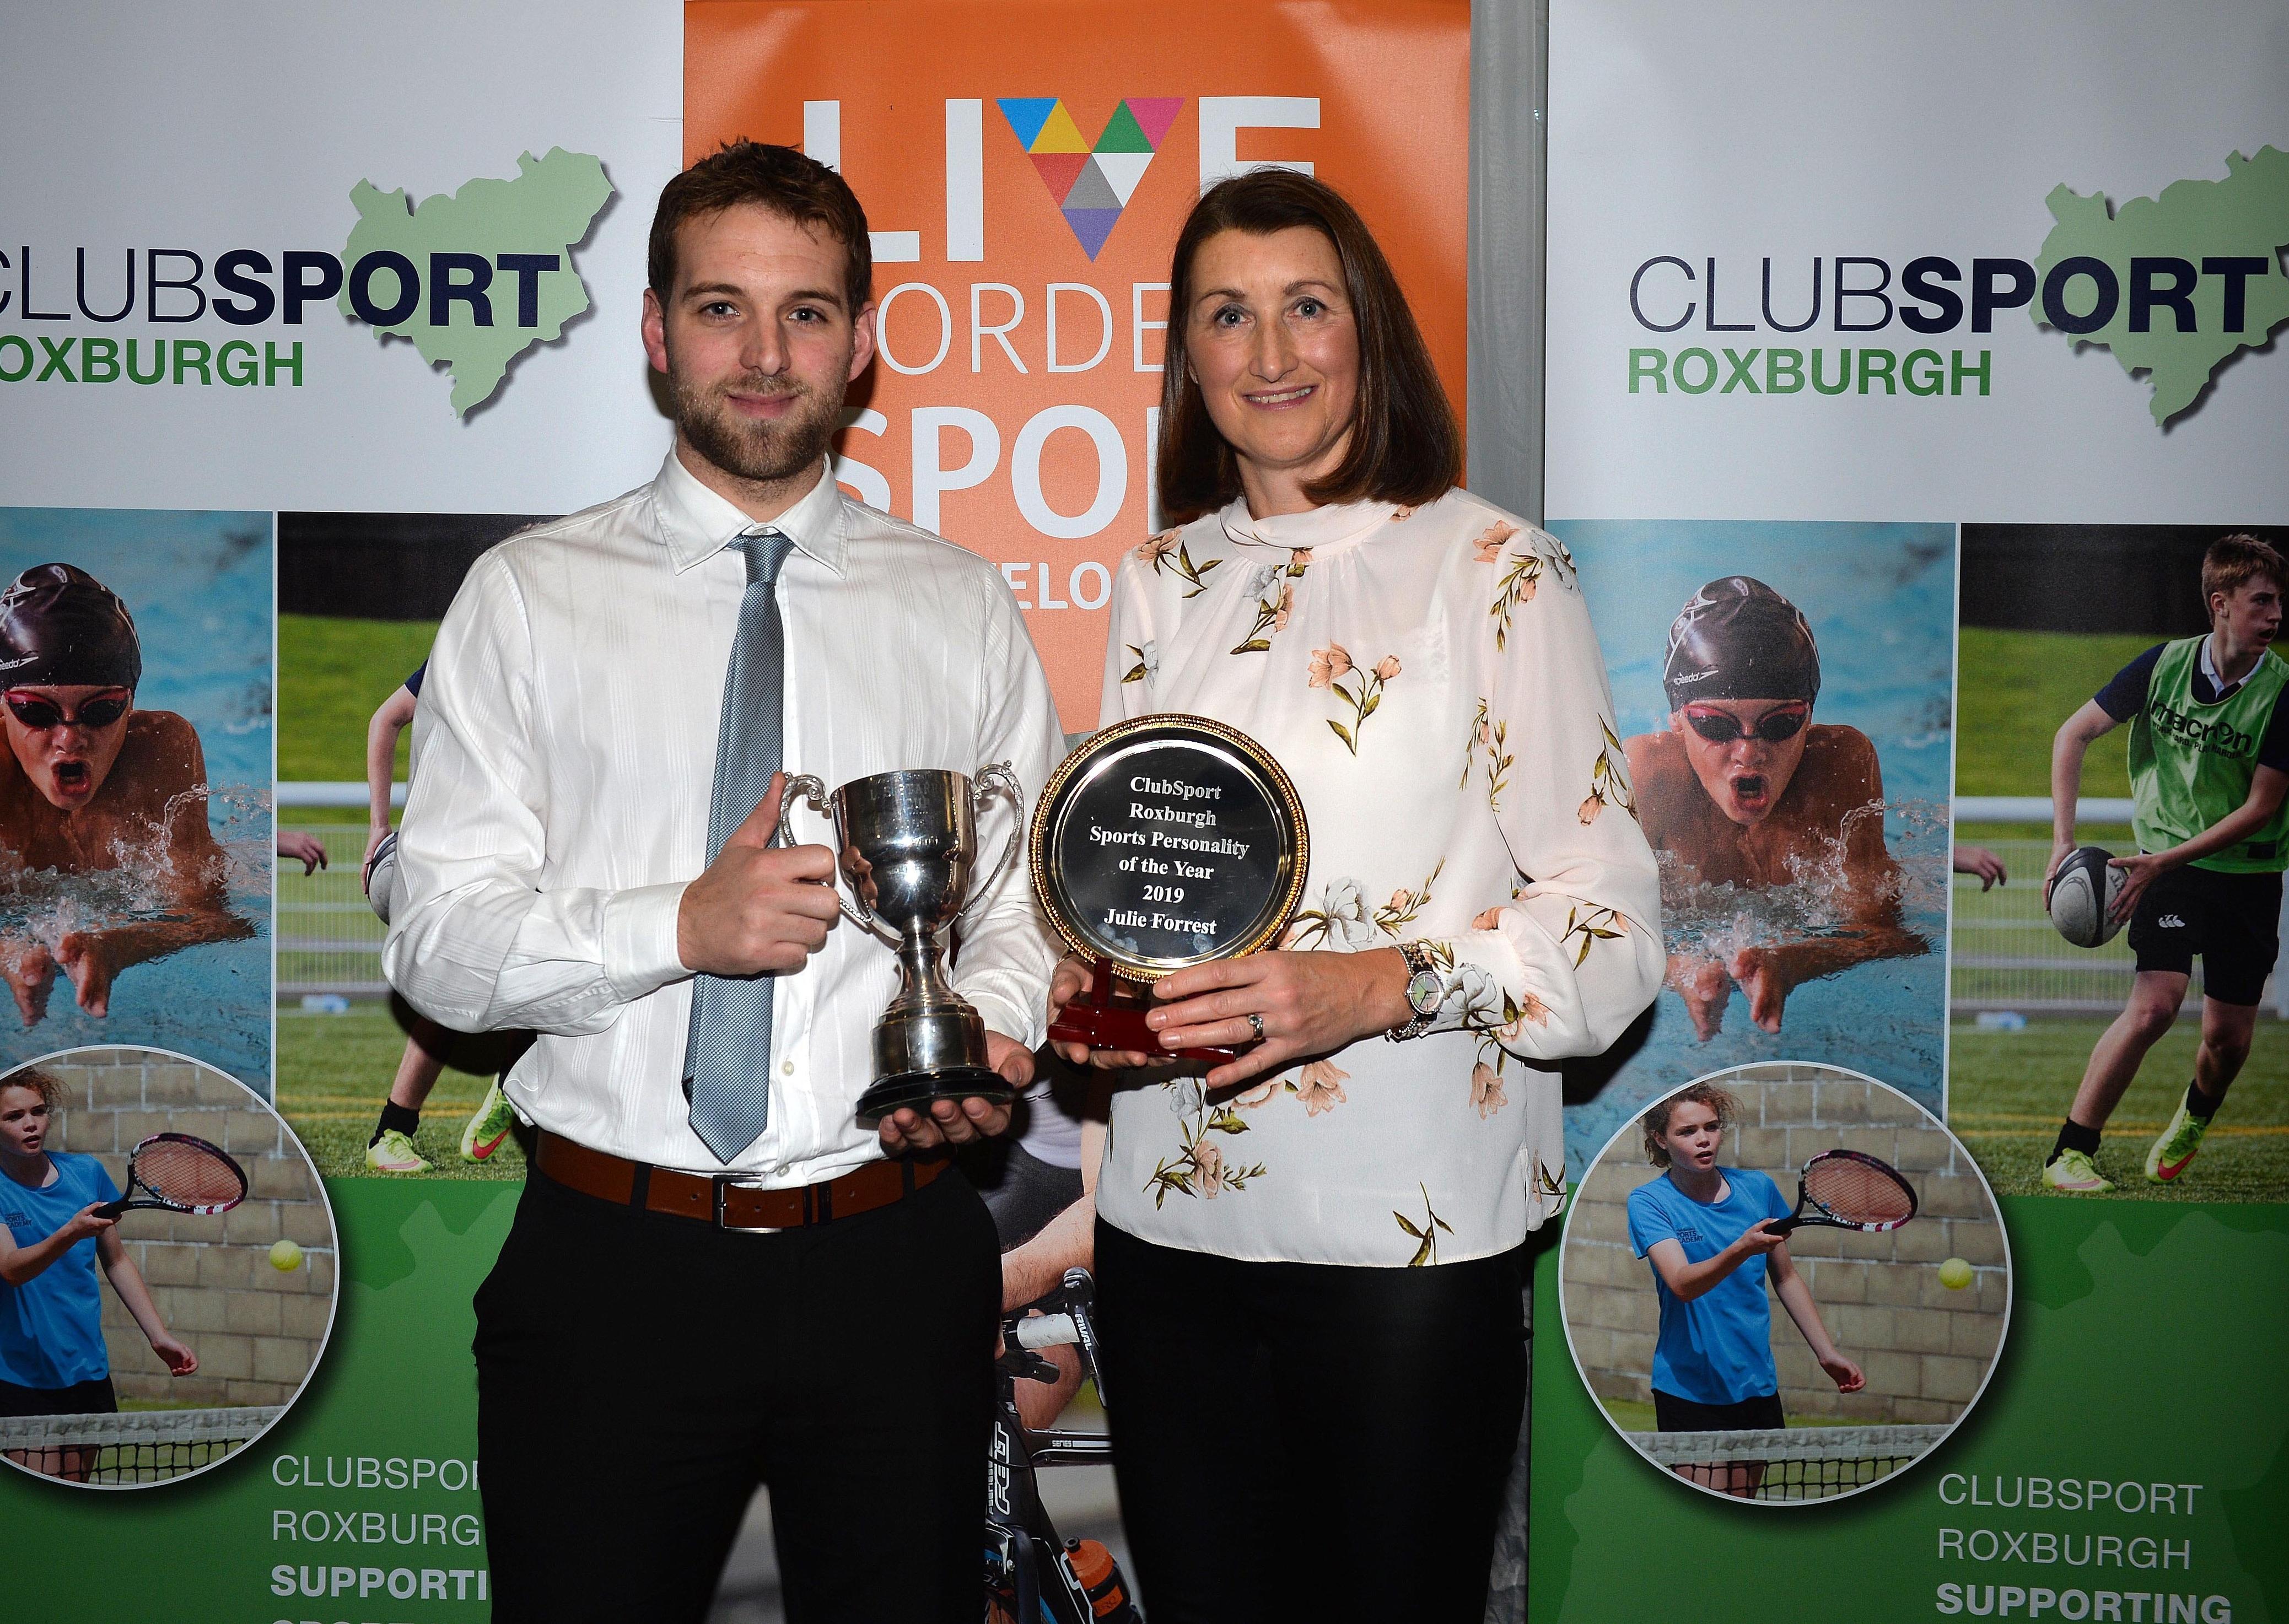 Bowls player Julie Forrest, of Hawick, was the Sports Personality of the Year winner.